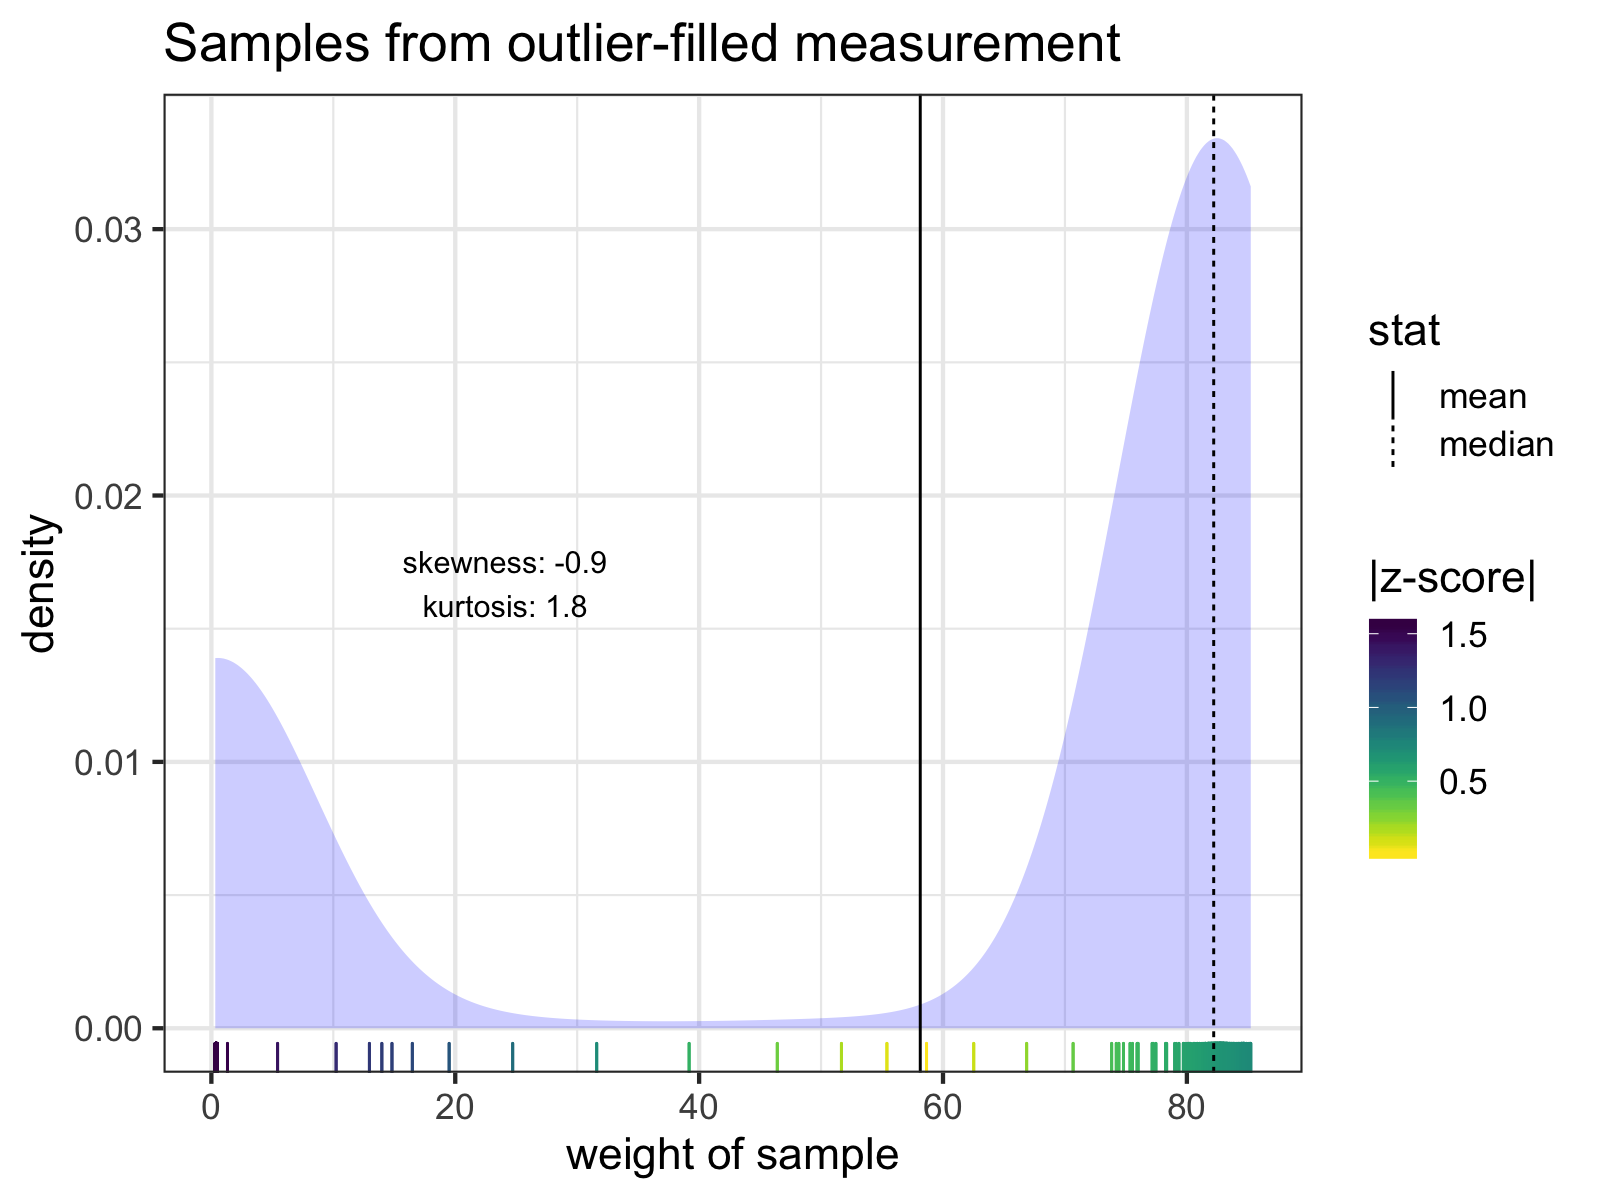 The individual samples of the measurement with the lowest mean weight. Notice how none of the z-scores of any of the samples exceed 3 SD from the mean. The mean and median of the samples are indicated with solid and dashed lines, respectively. Skew and kurtosis are also shown.